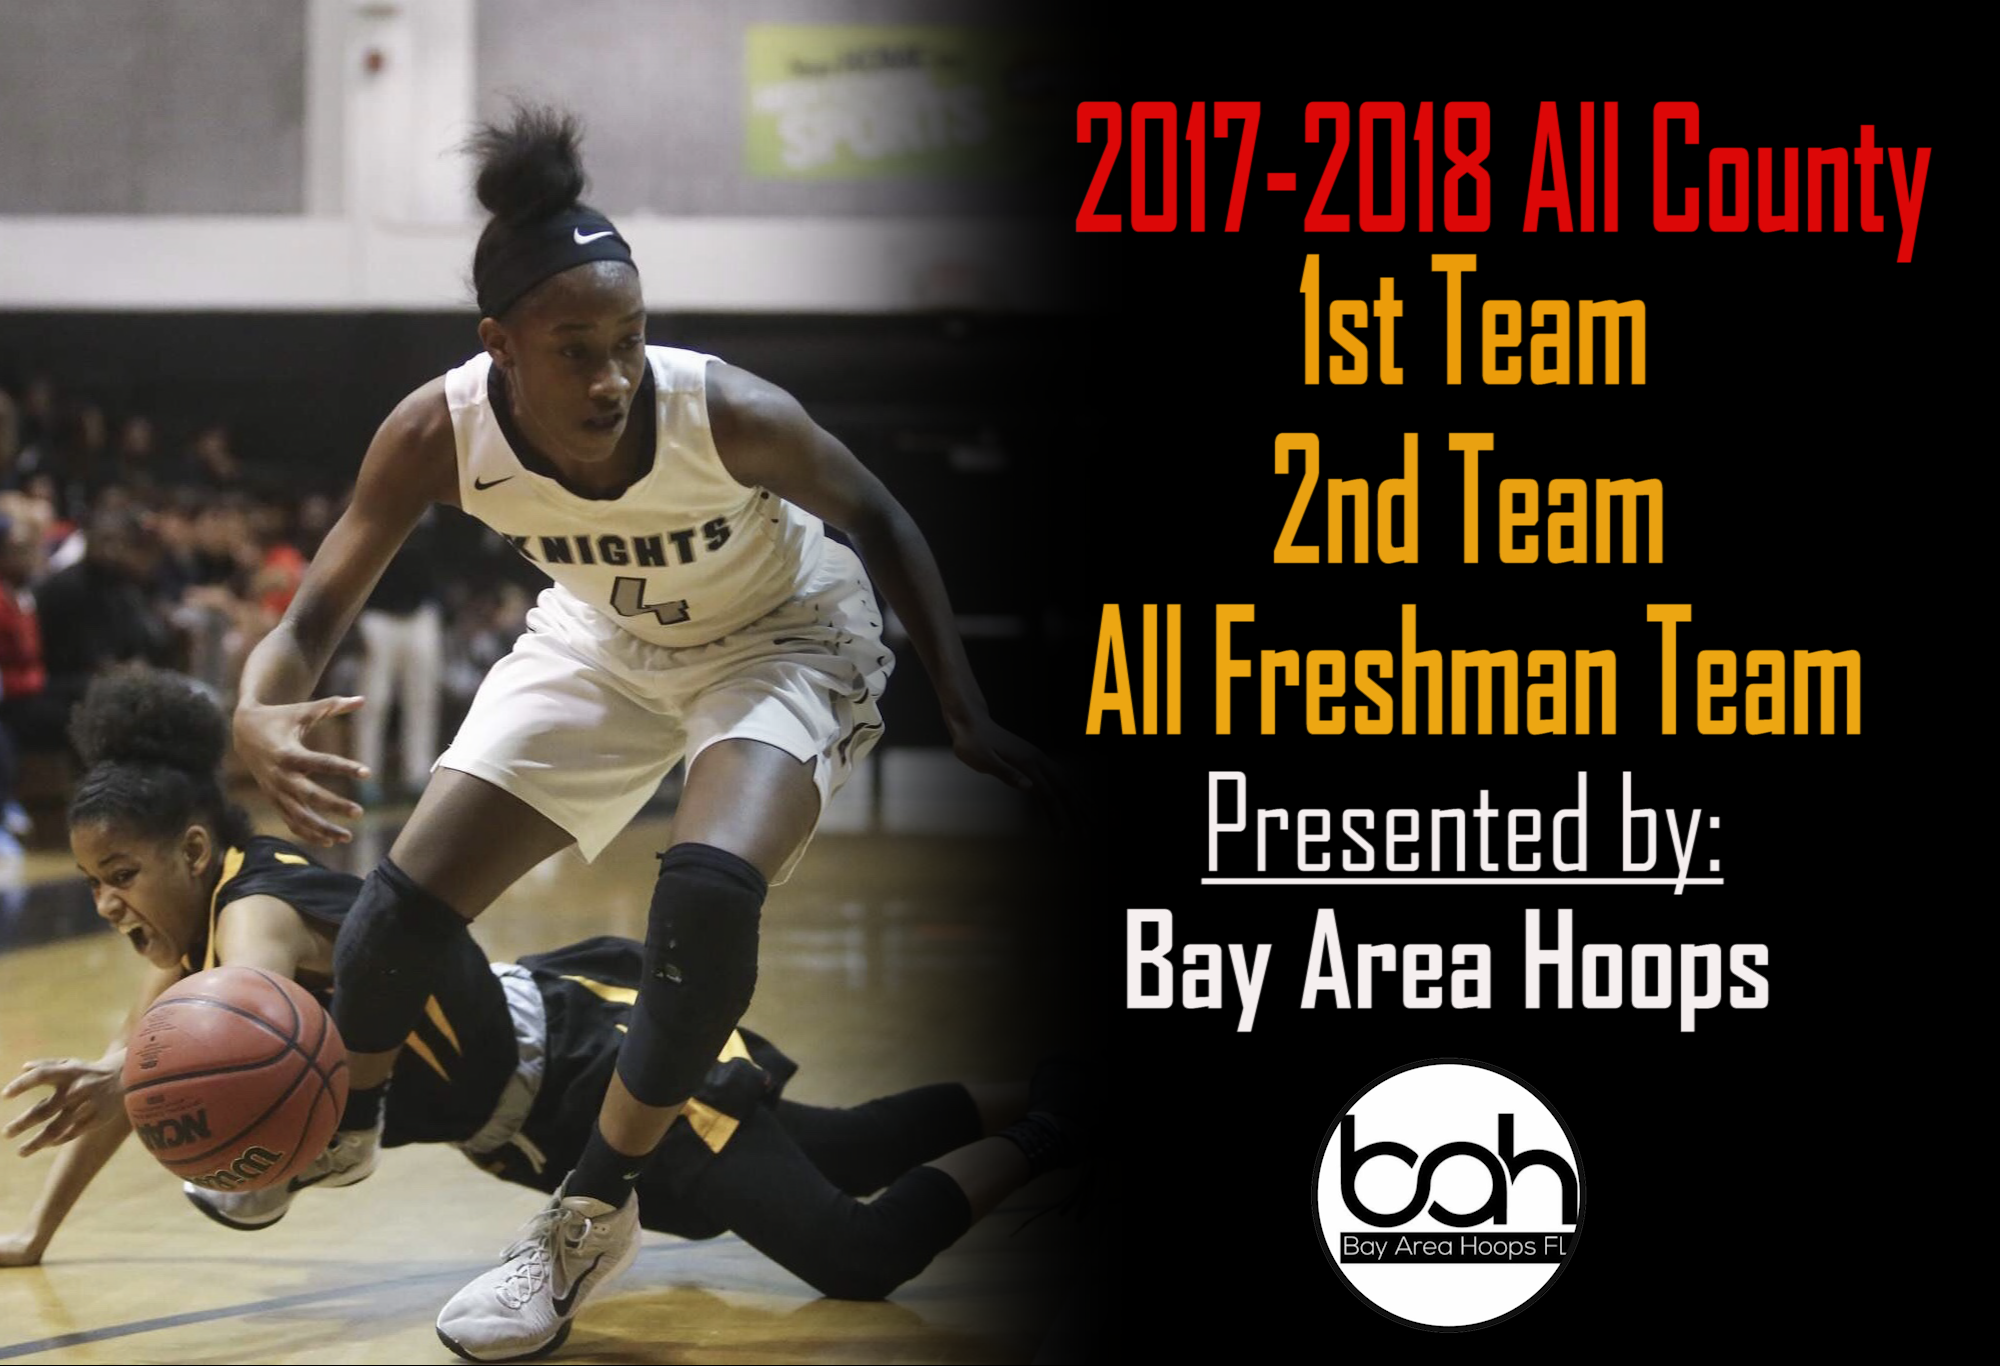 Bay Area Hoops 2017-2018 All-Hillsborough County Girls Selections